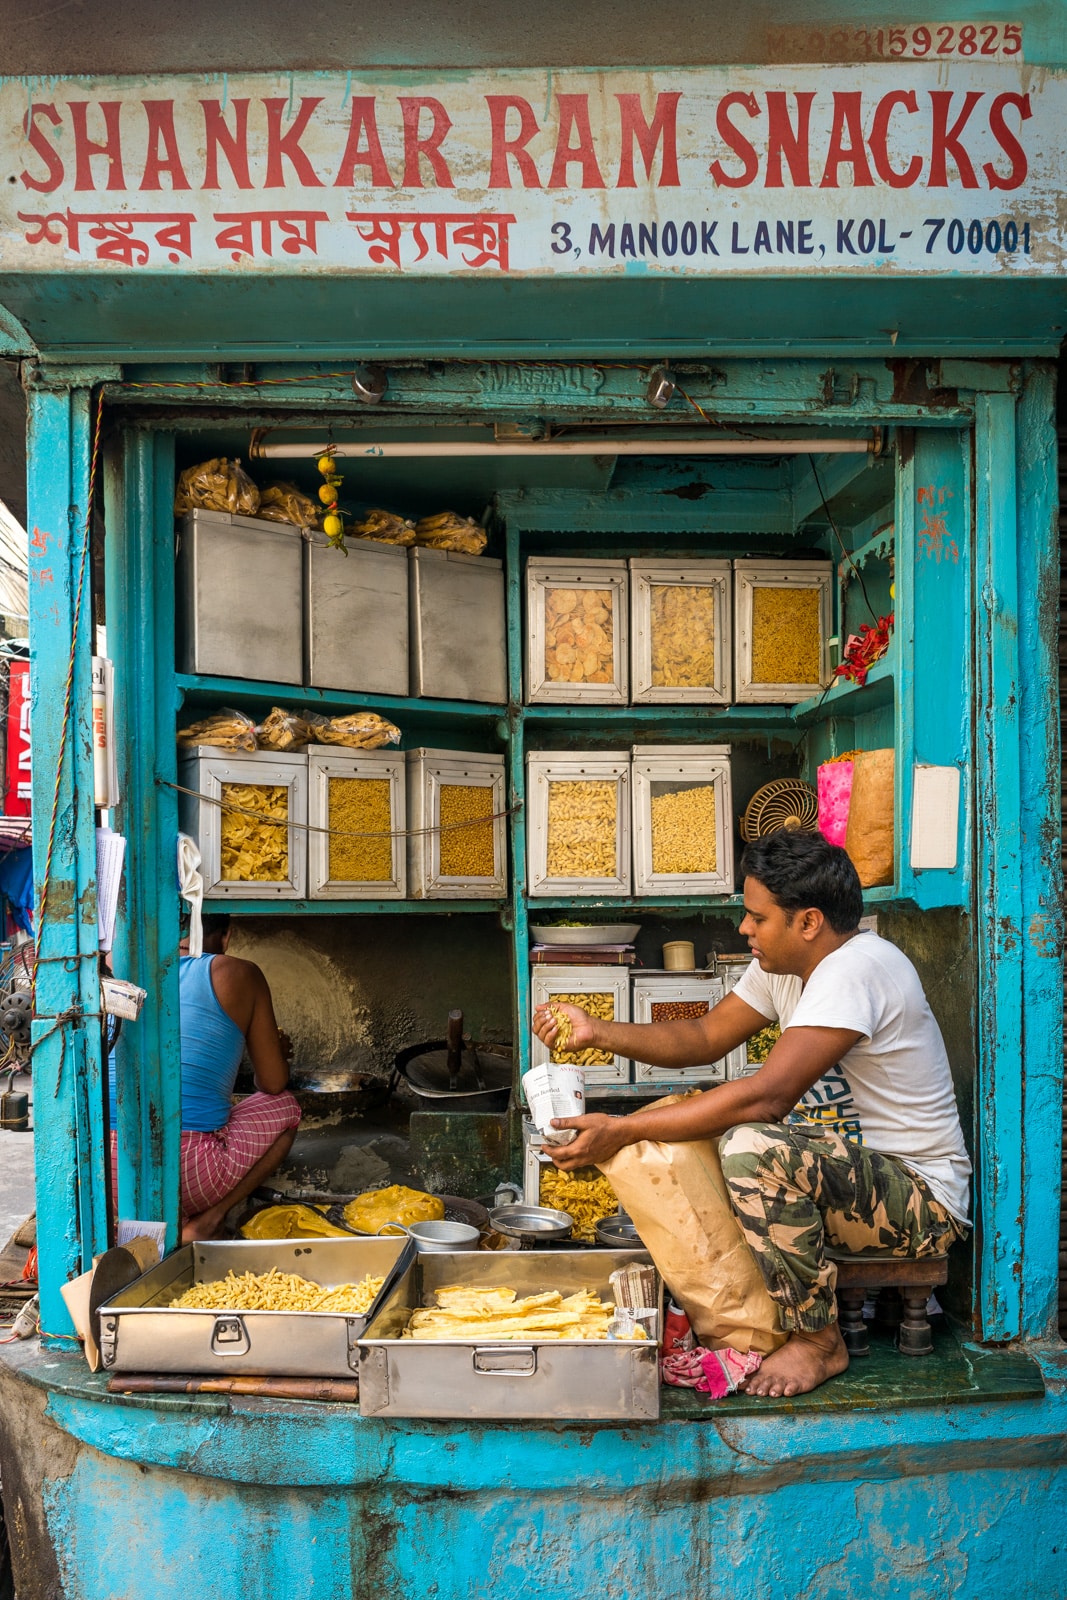 A tiny blue hole-in-the-wall fried snack stand in Kolkata, West Bengal, India.